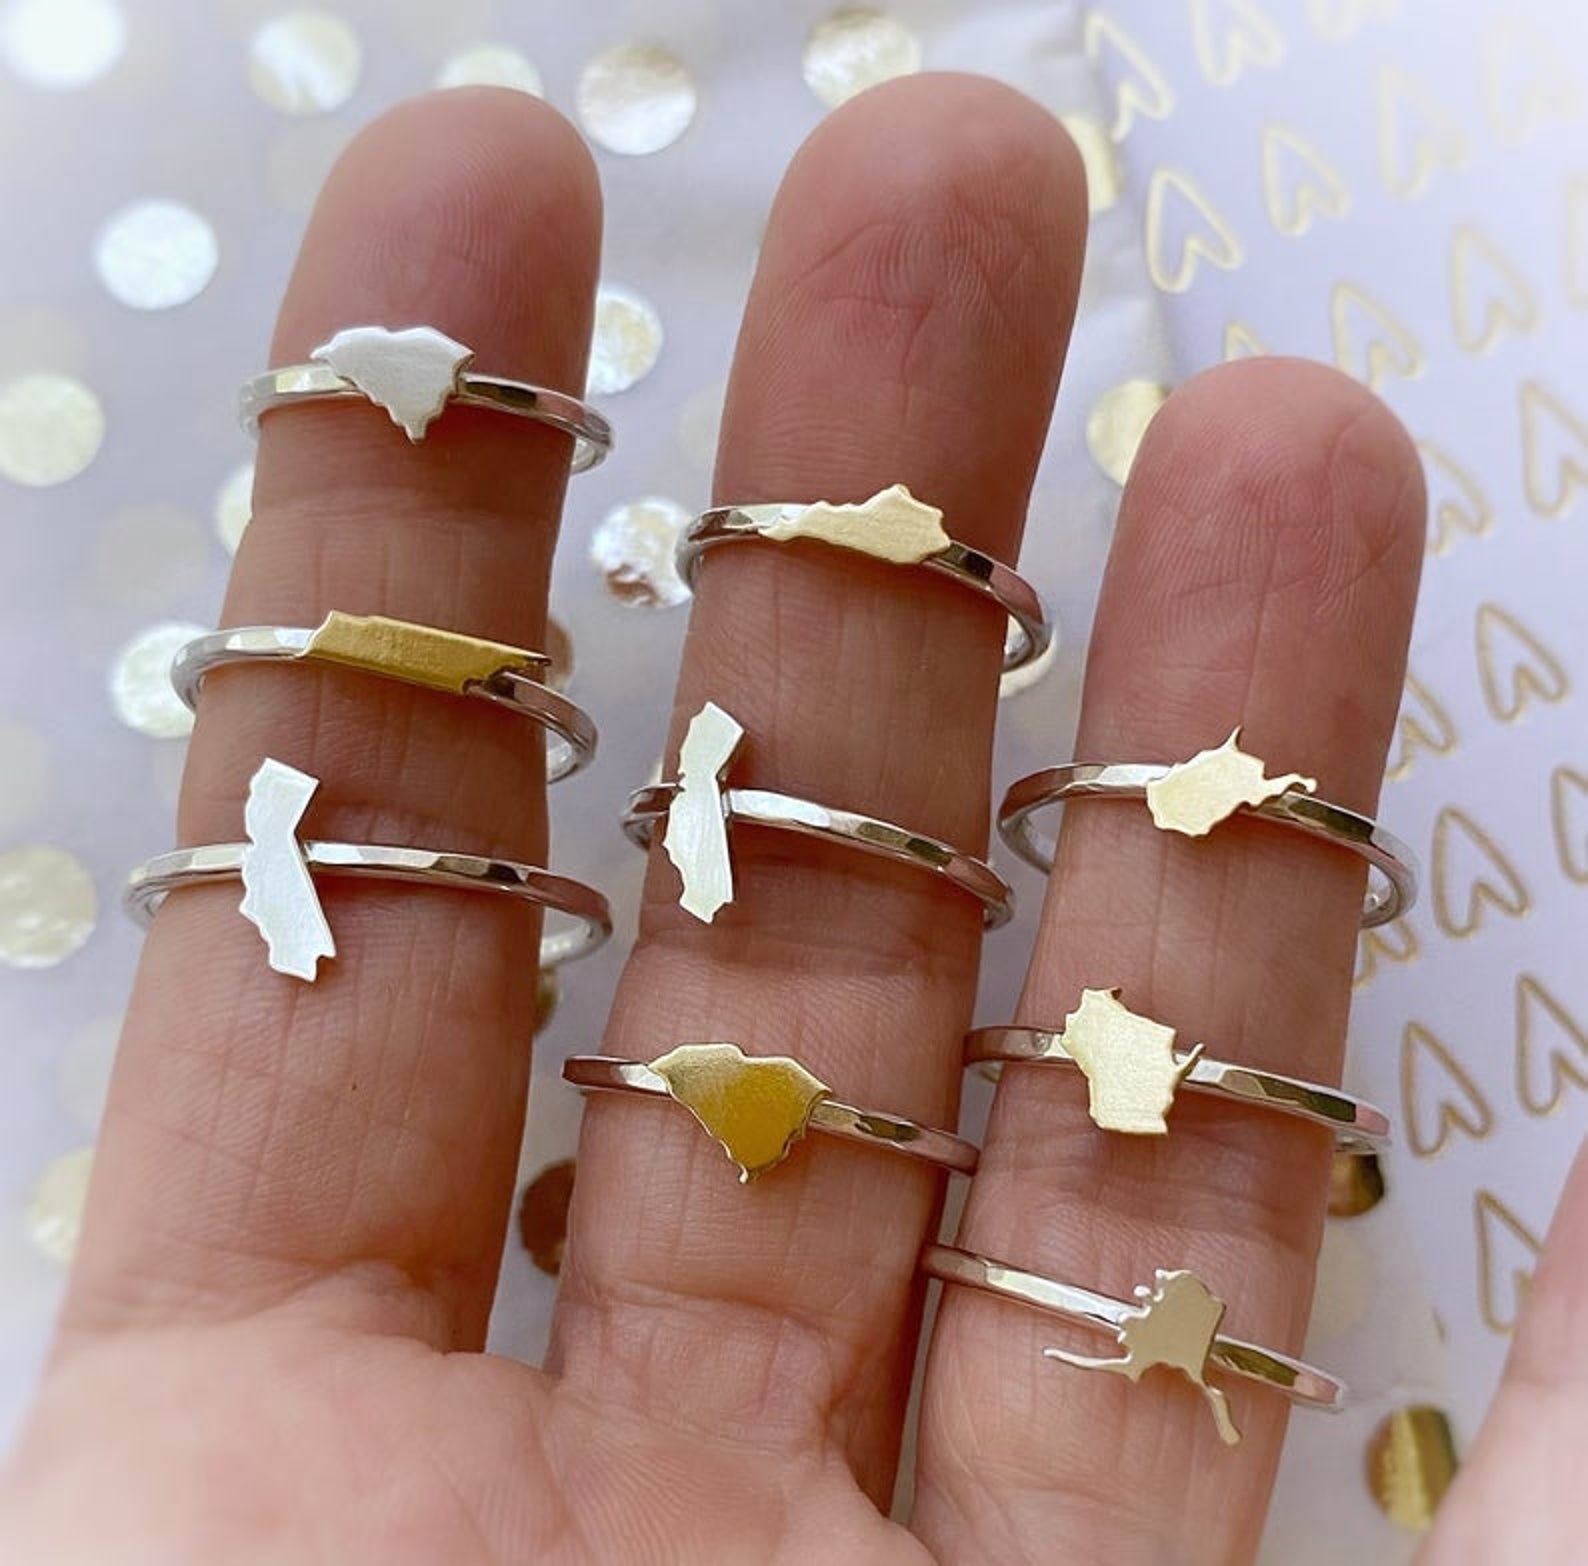 Several dainty rings outlined in various states and modeled around three fingers